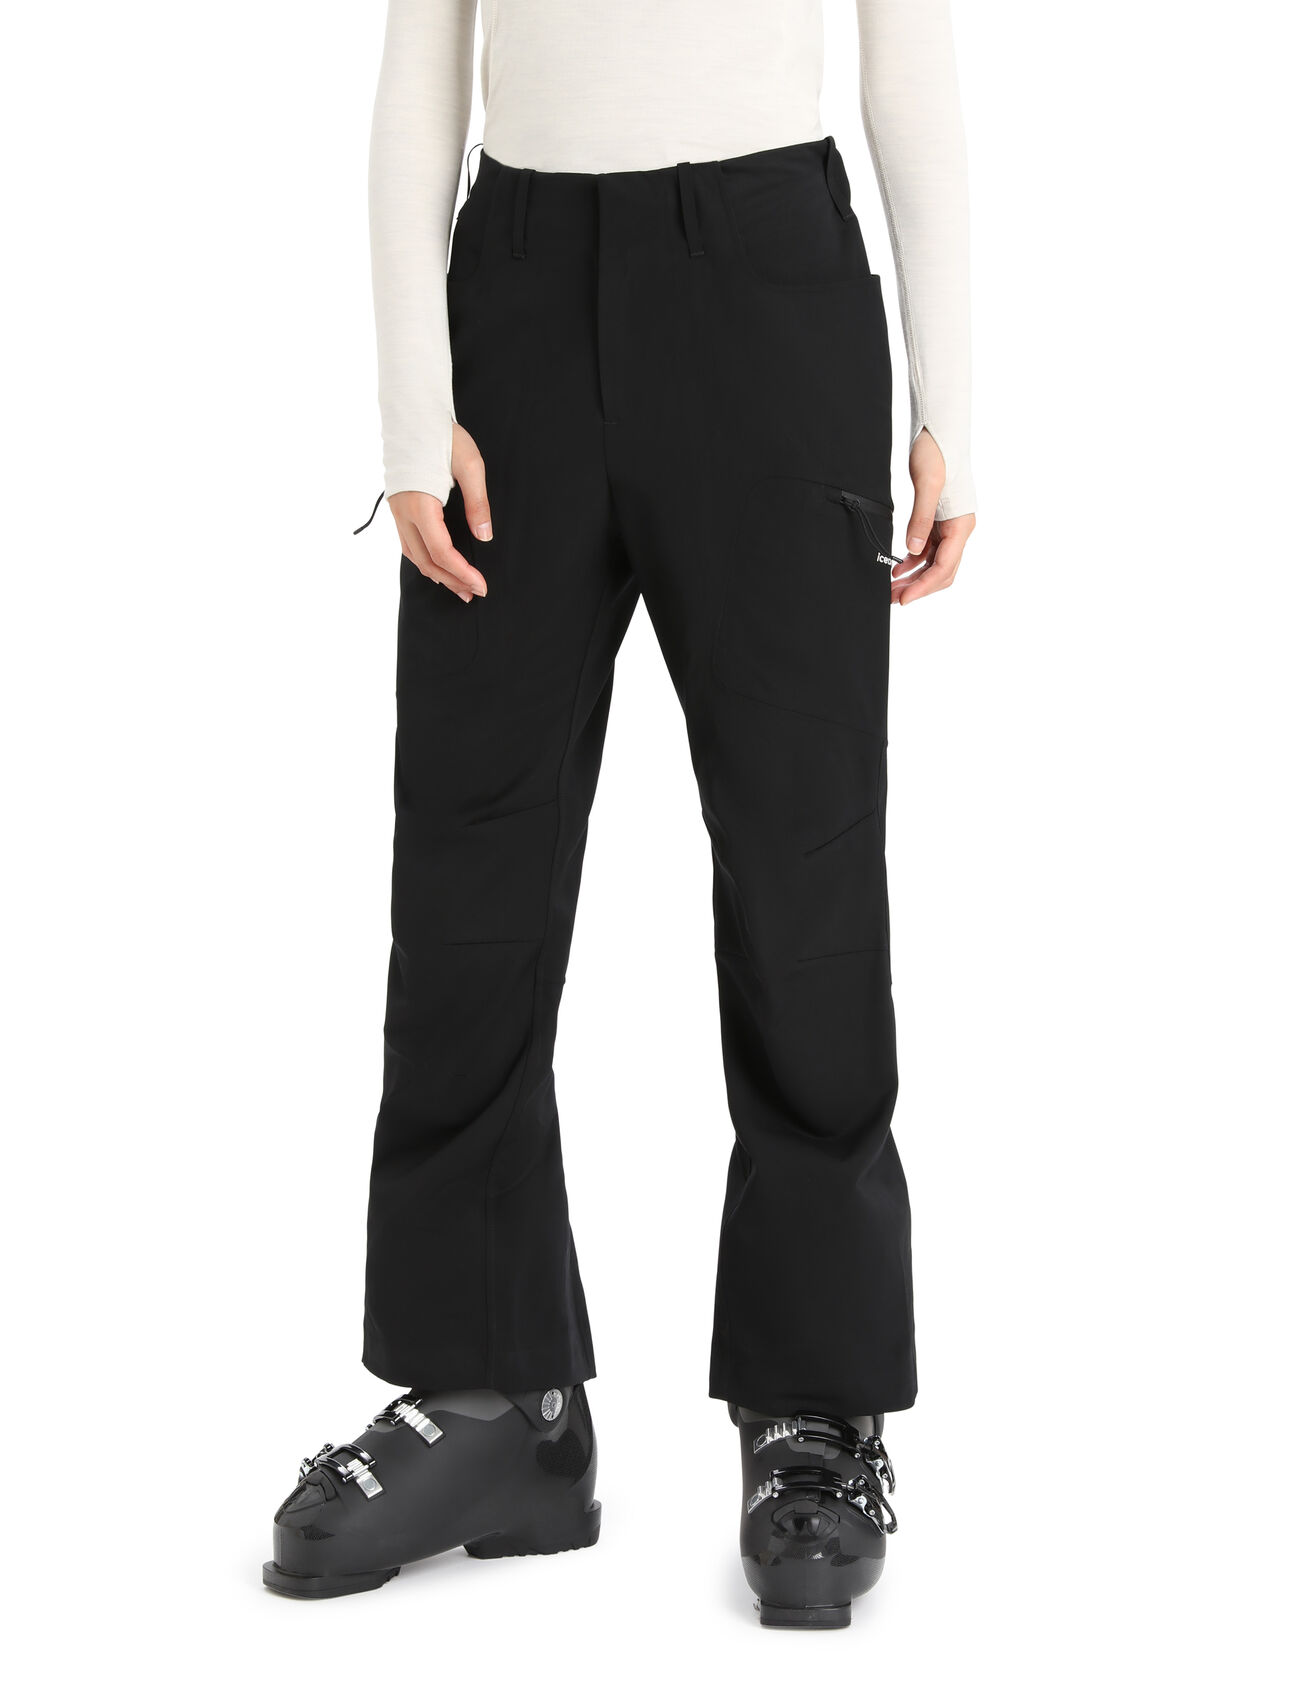 Womens Shell+™ Merino Pants Versatile, highly weather resistant shell pants made with 100% pure merino wool, the Shell+™ Pants features a durable, PFC-free water-repellent finish to keep you warm and dry in changing conditions.